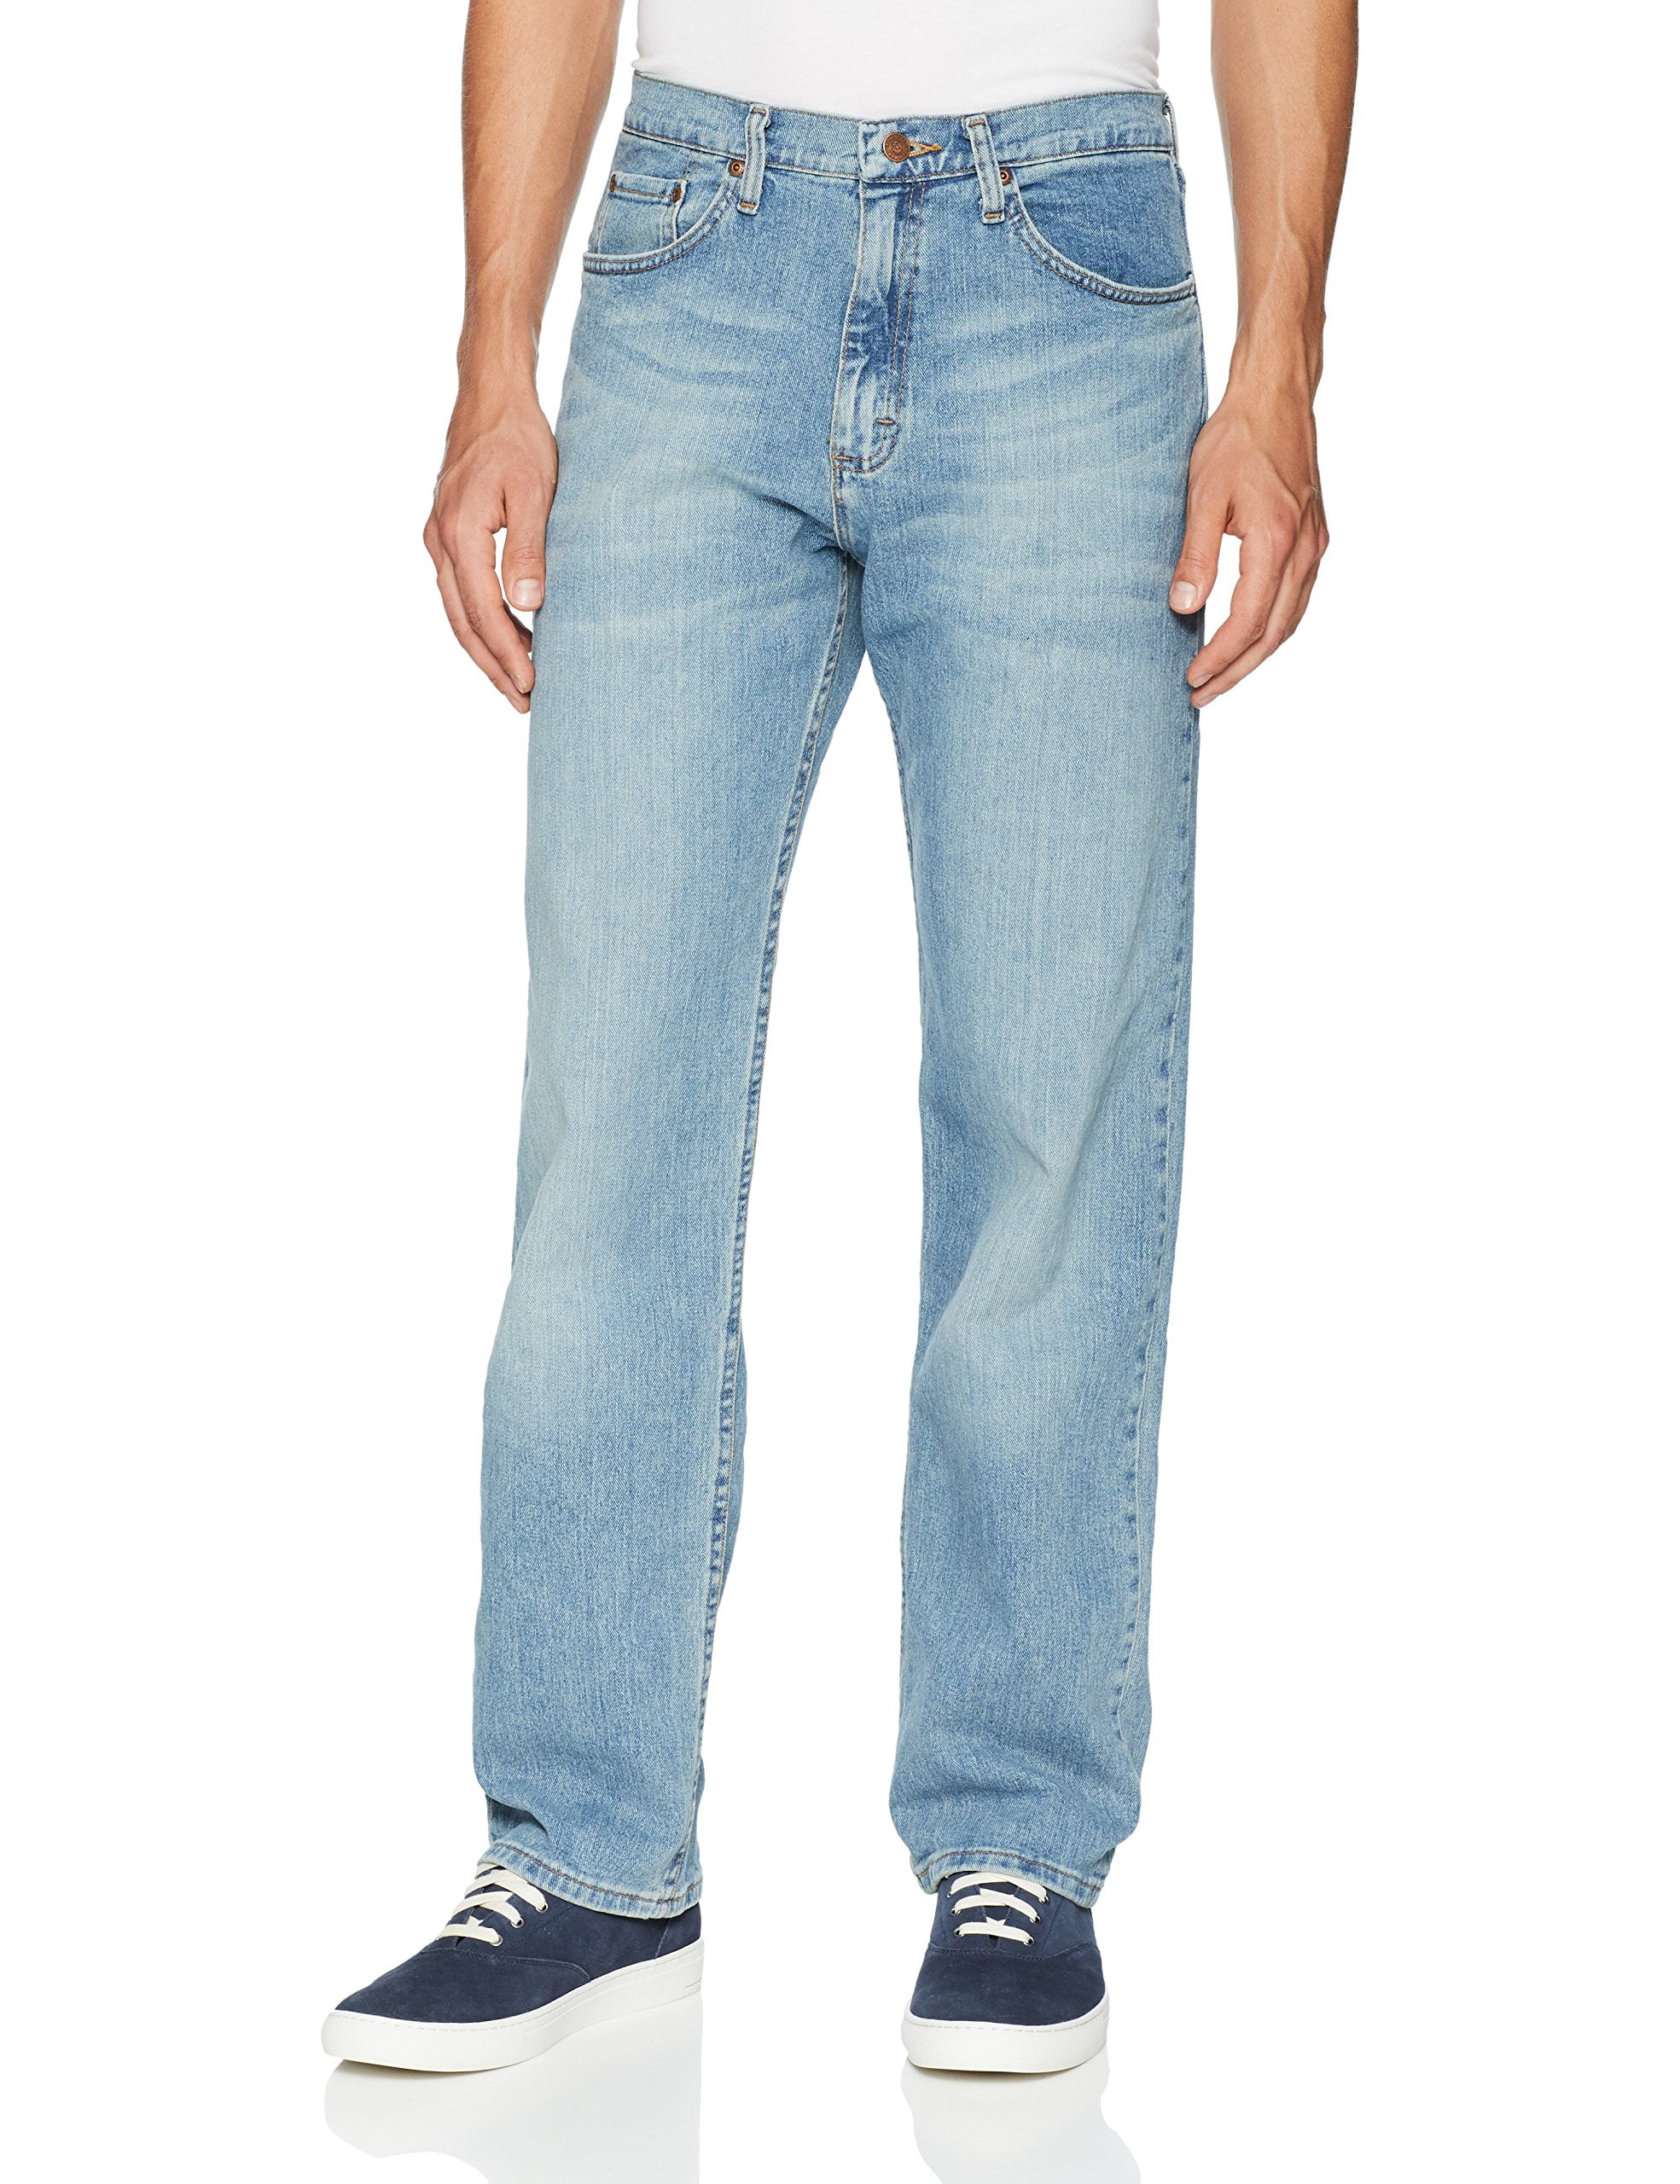 Wrangler Authentics Mens Jeans 28x30 Relaxed Fit Stretch - Walmart.com